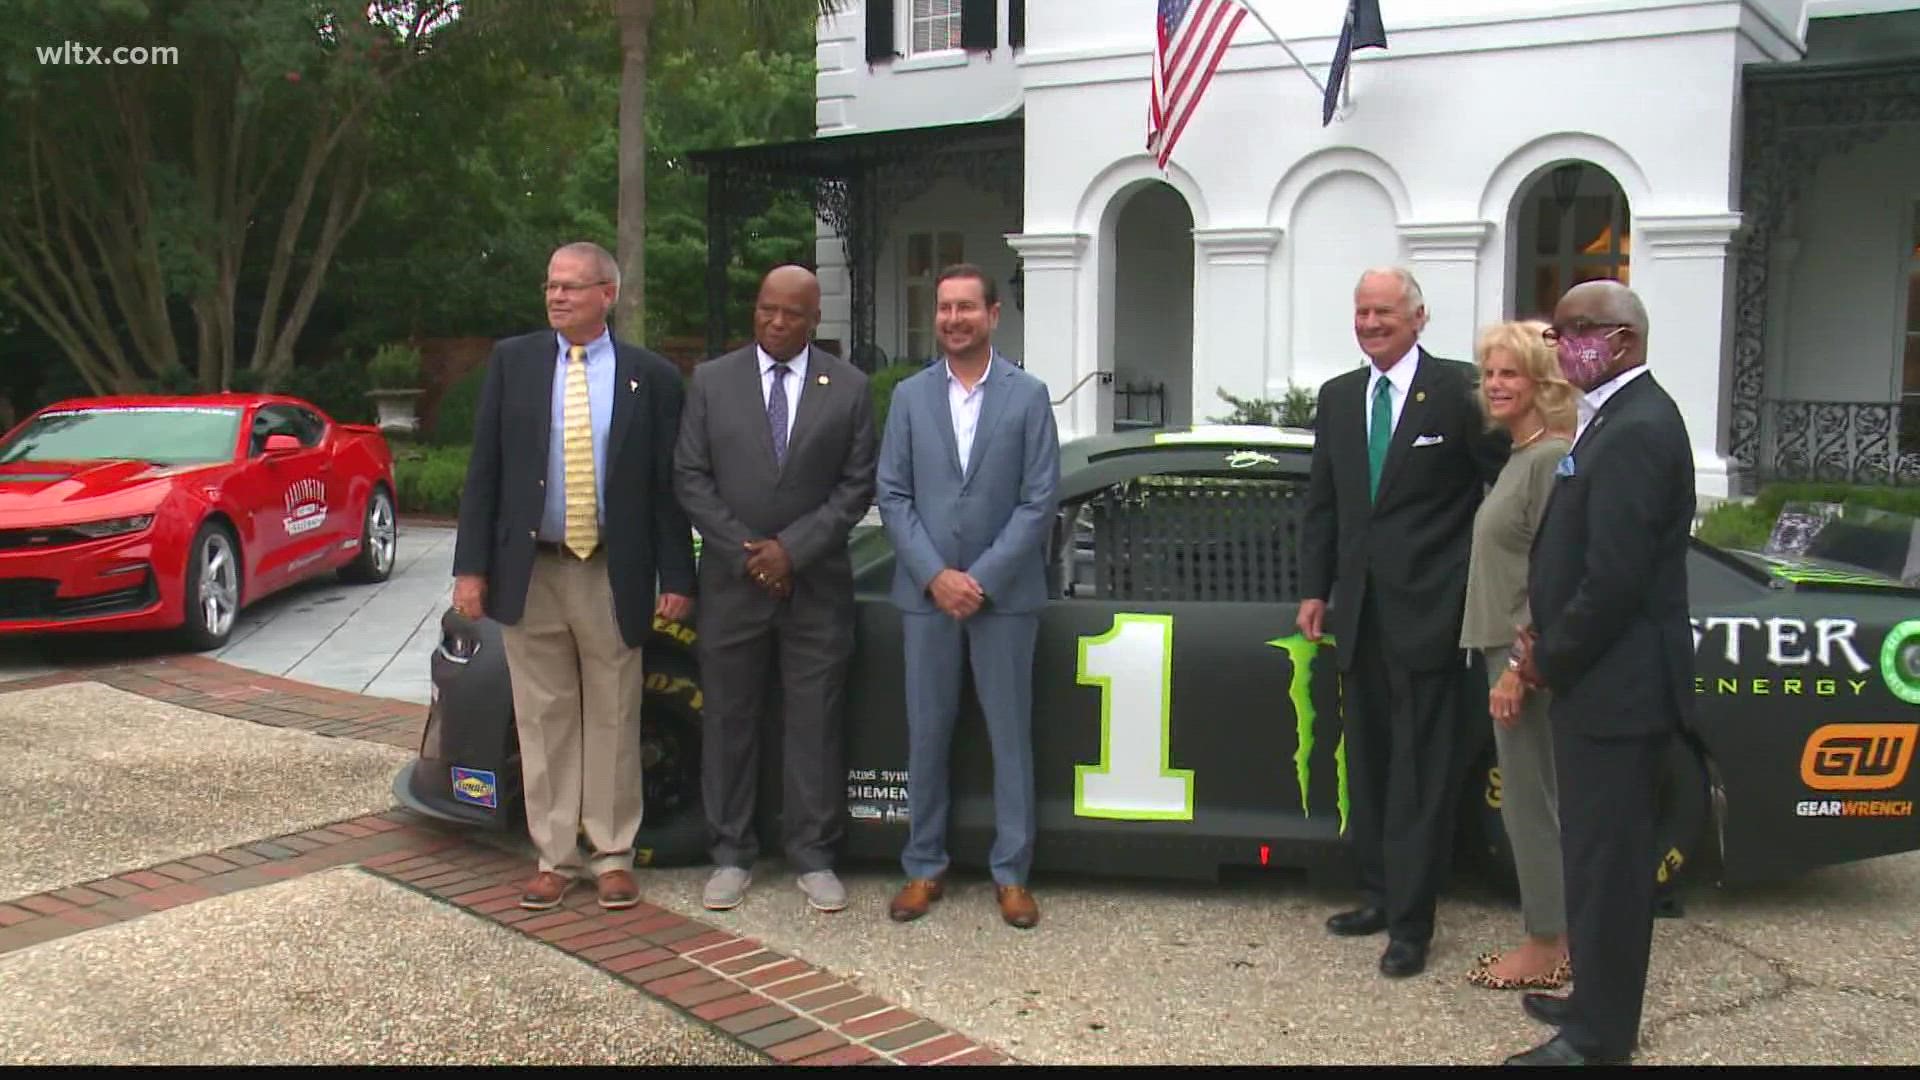 Former Cup champion Kurt Busch came to Columbia this week to help promote the upcoming Cook Out Southern 500.